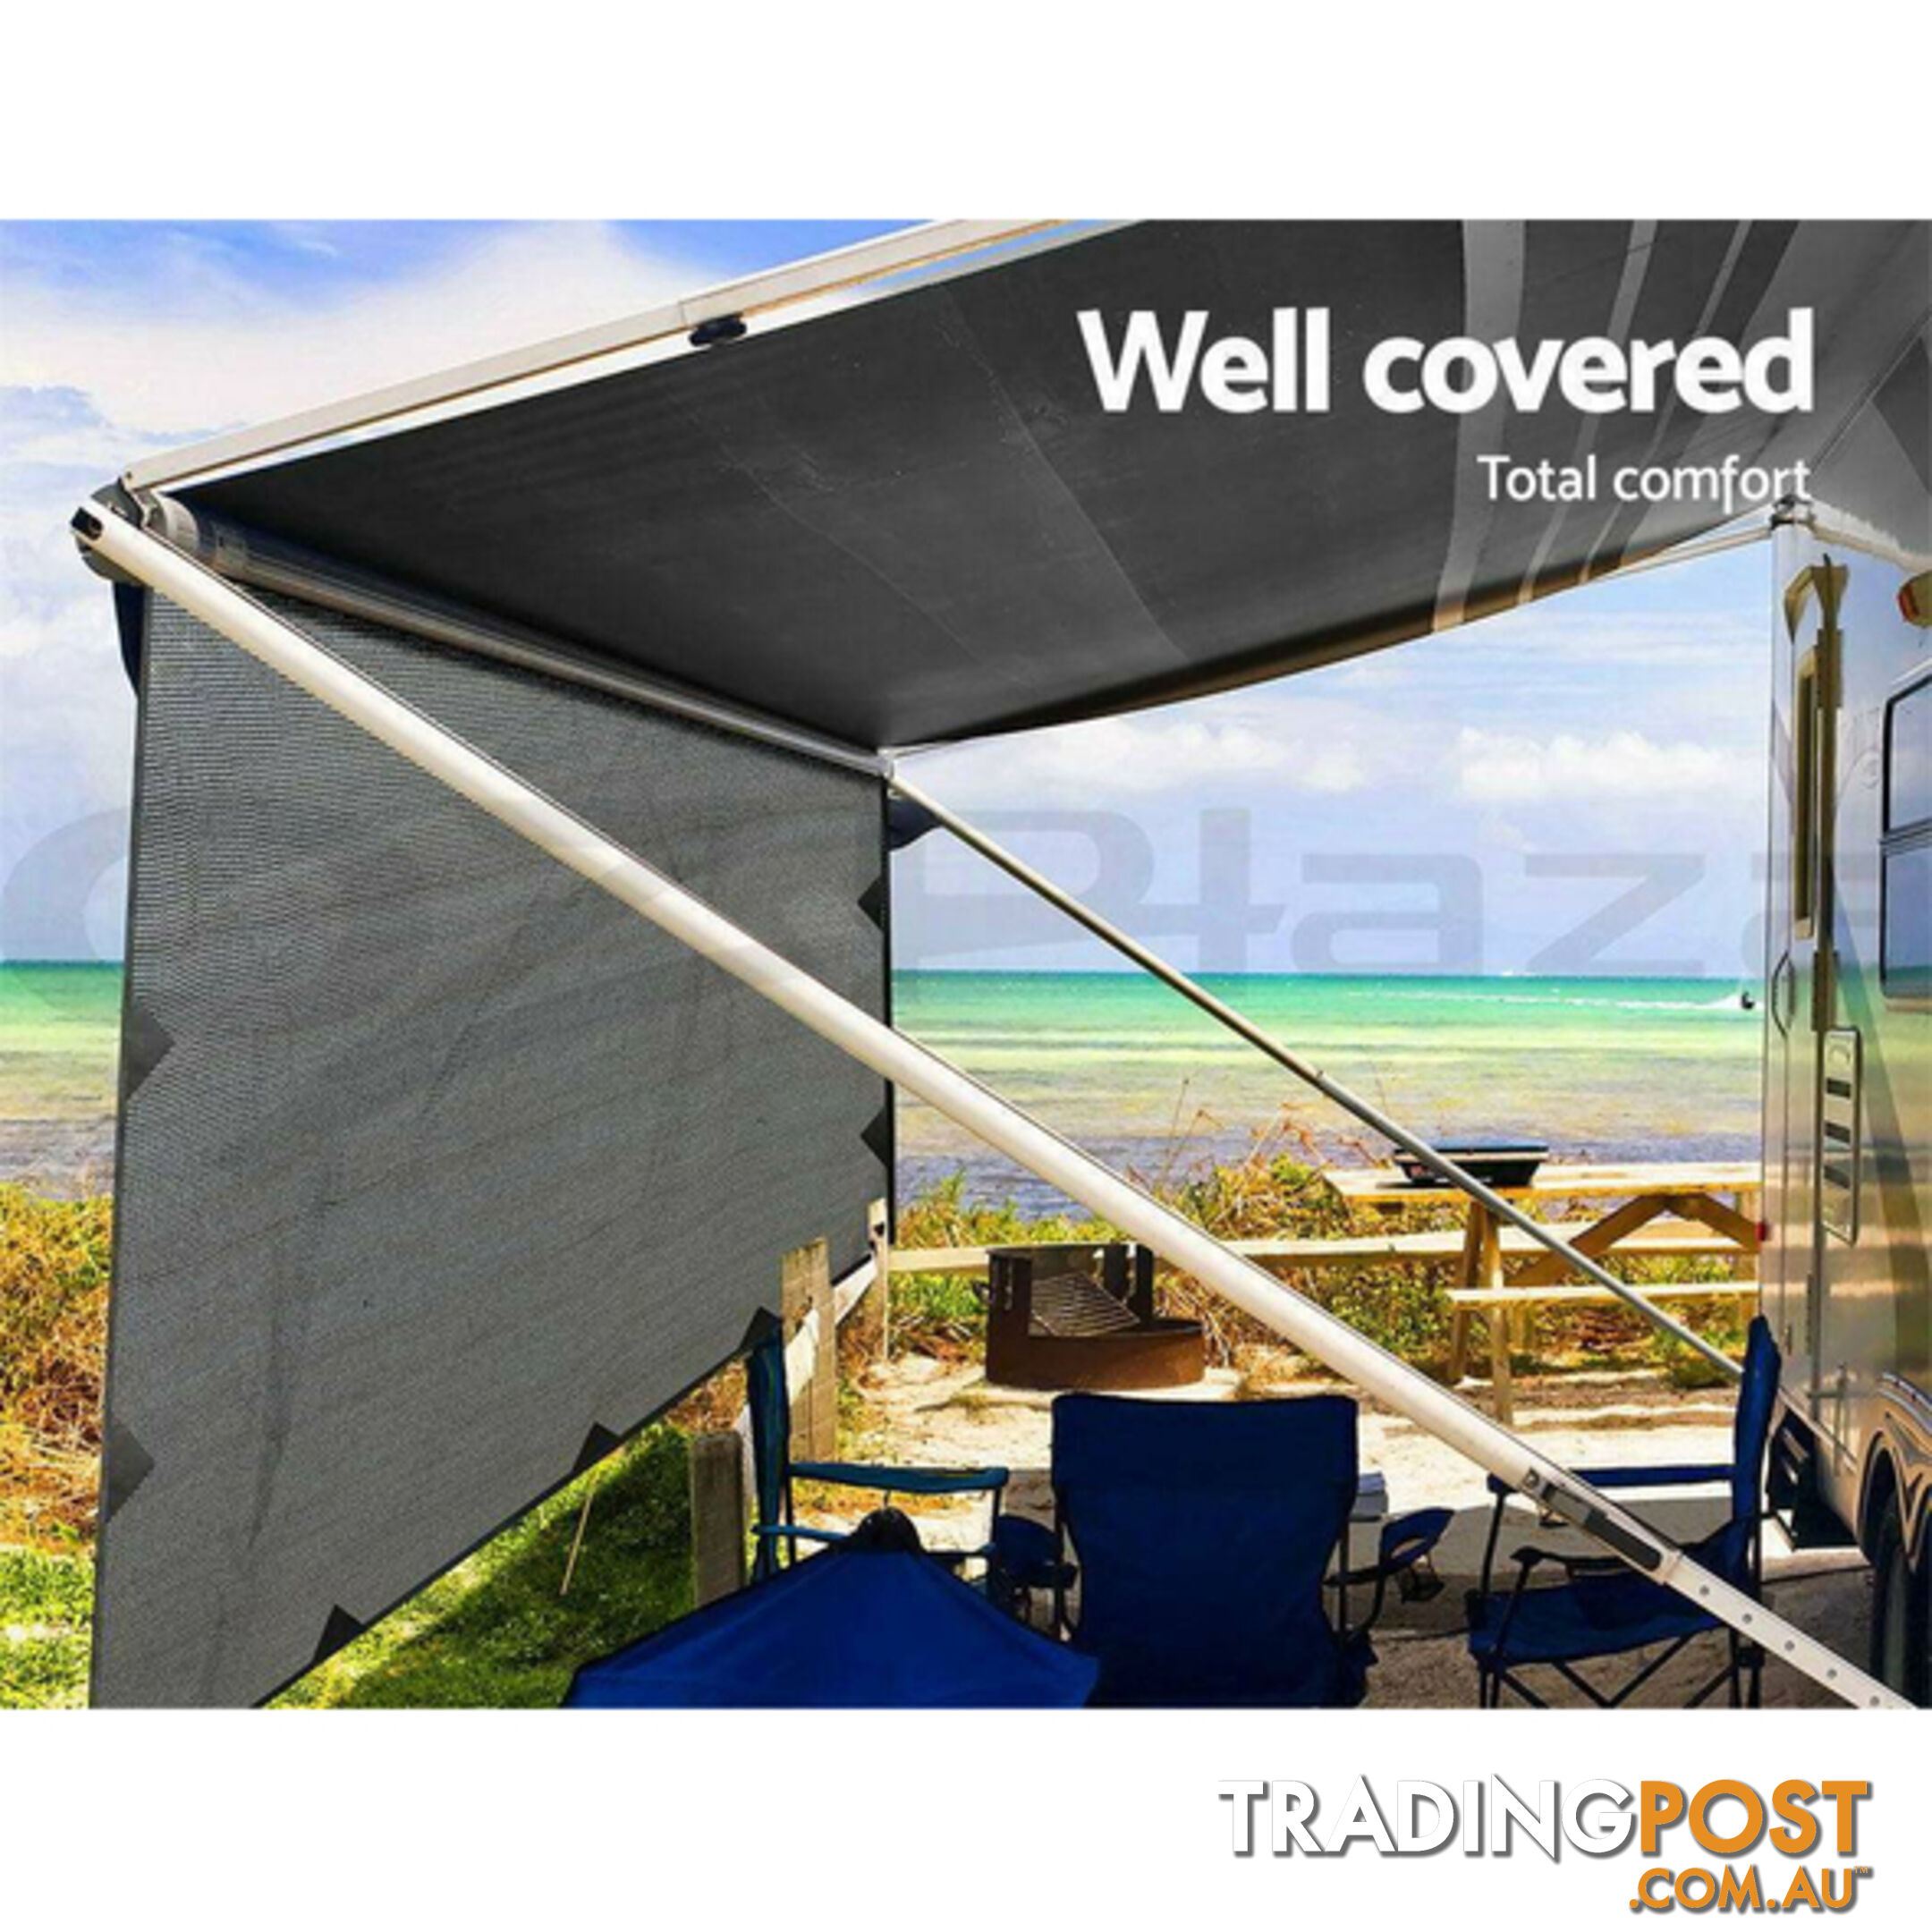 3.4M Caravan Privacy Screens 1.95m Roll Out Awning End Wall Side Sun Shade